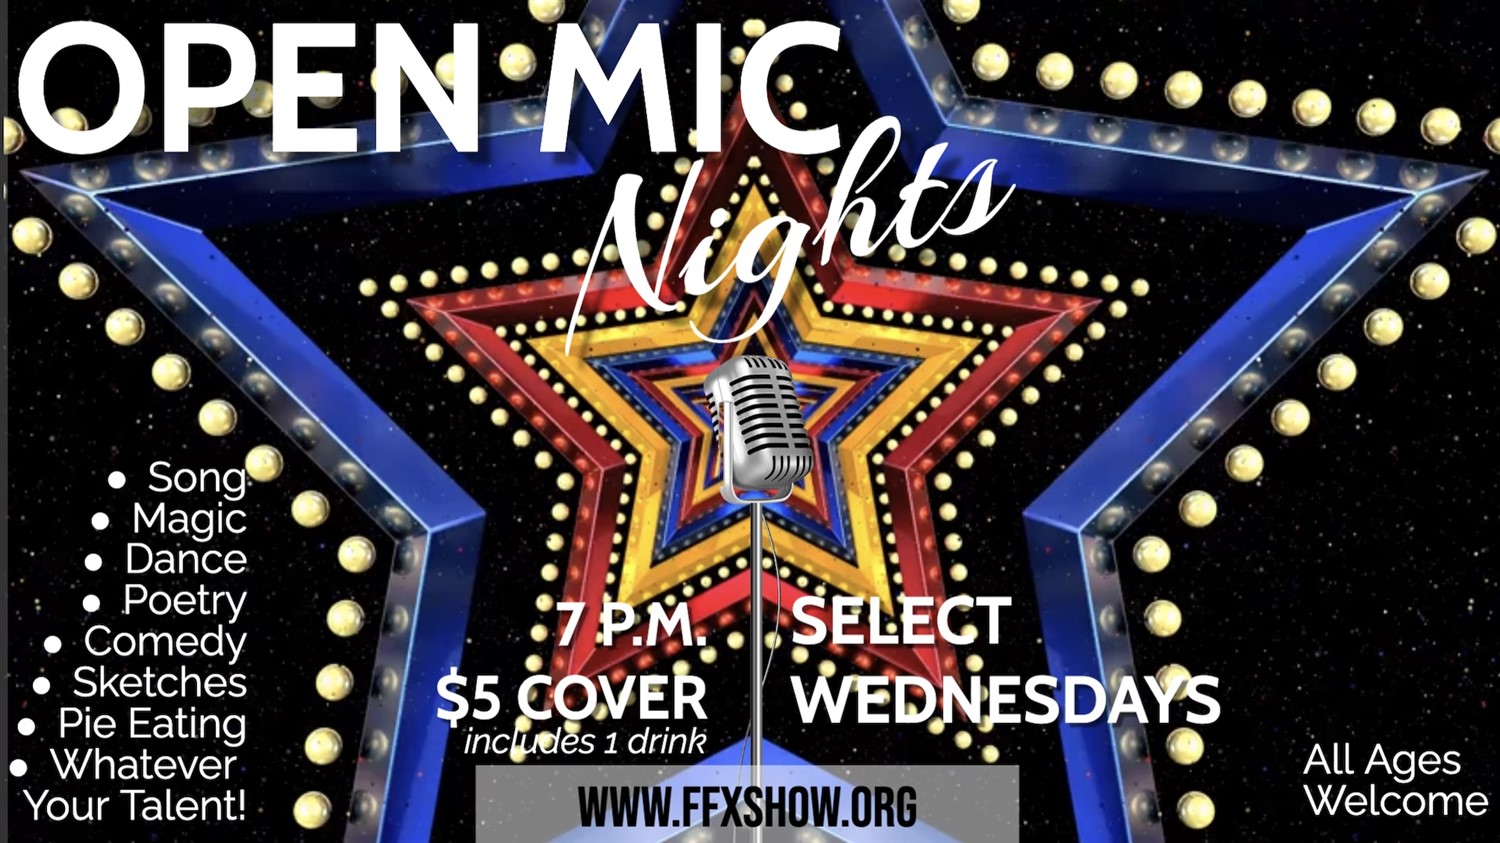 OPEN MIC NIGHT Come out to enjoy or share your talents on the FFX Stage! on feb. 08, 19:00@FFX Theatre - Compra entradas y obtén información enFamily Fun Xperience tickets.ffxshow.org